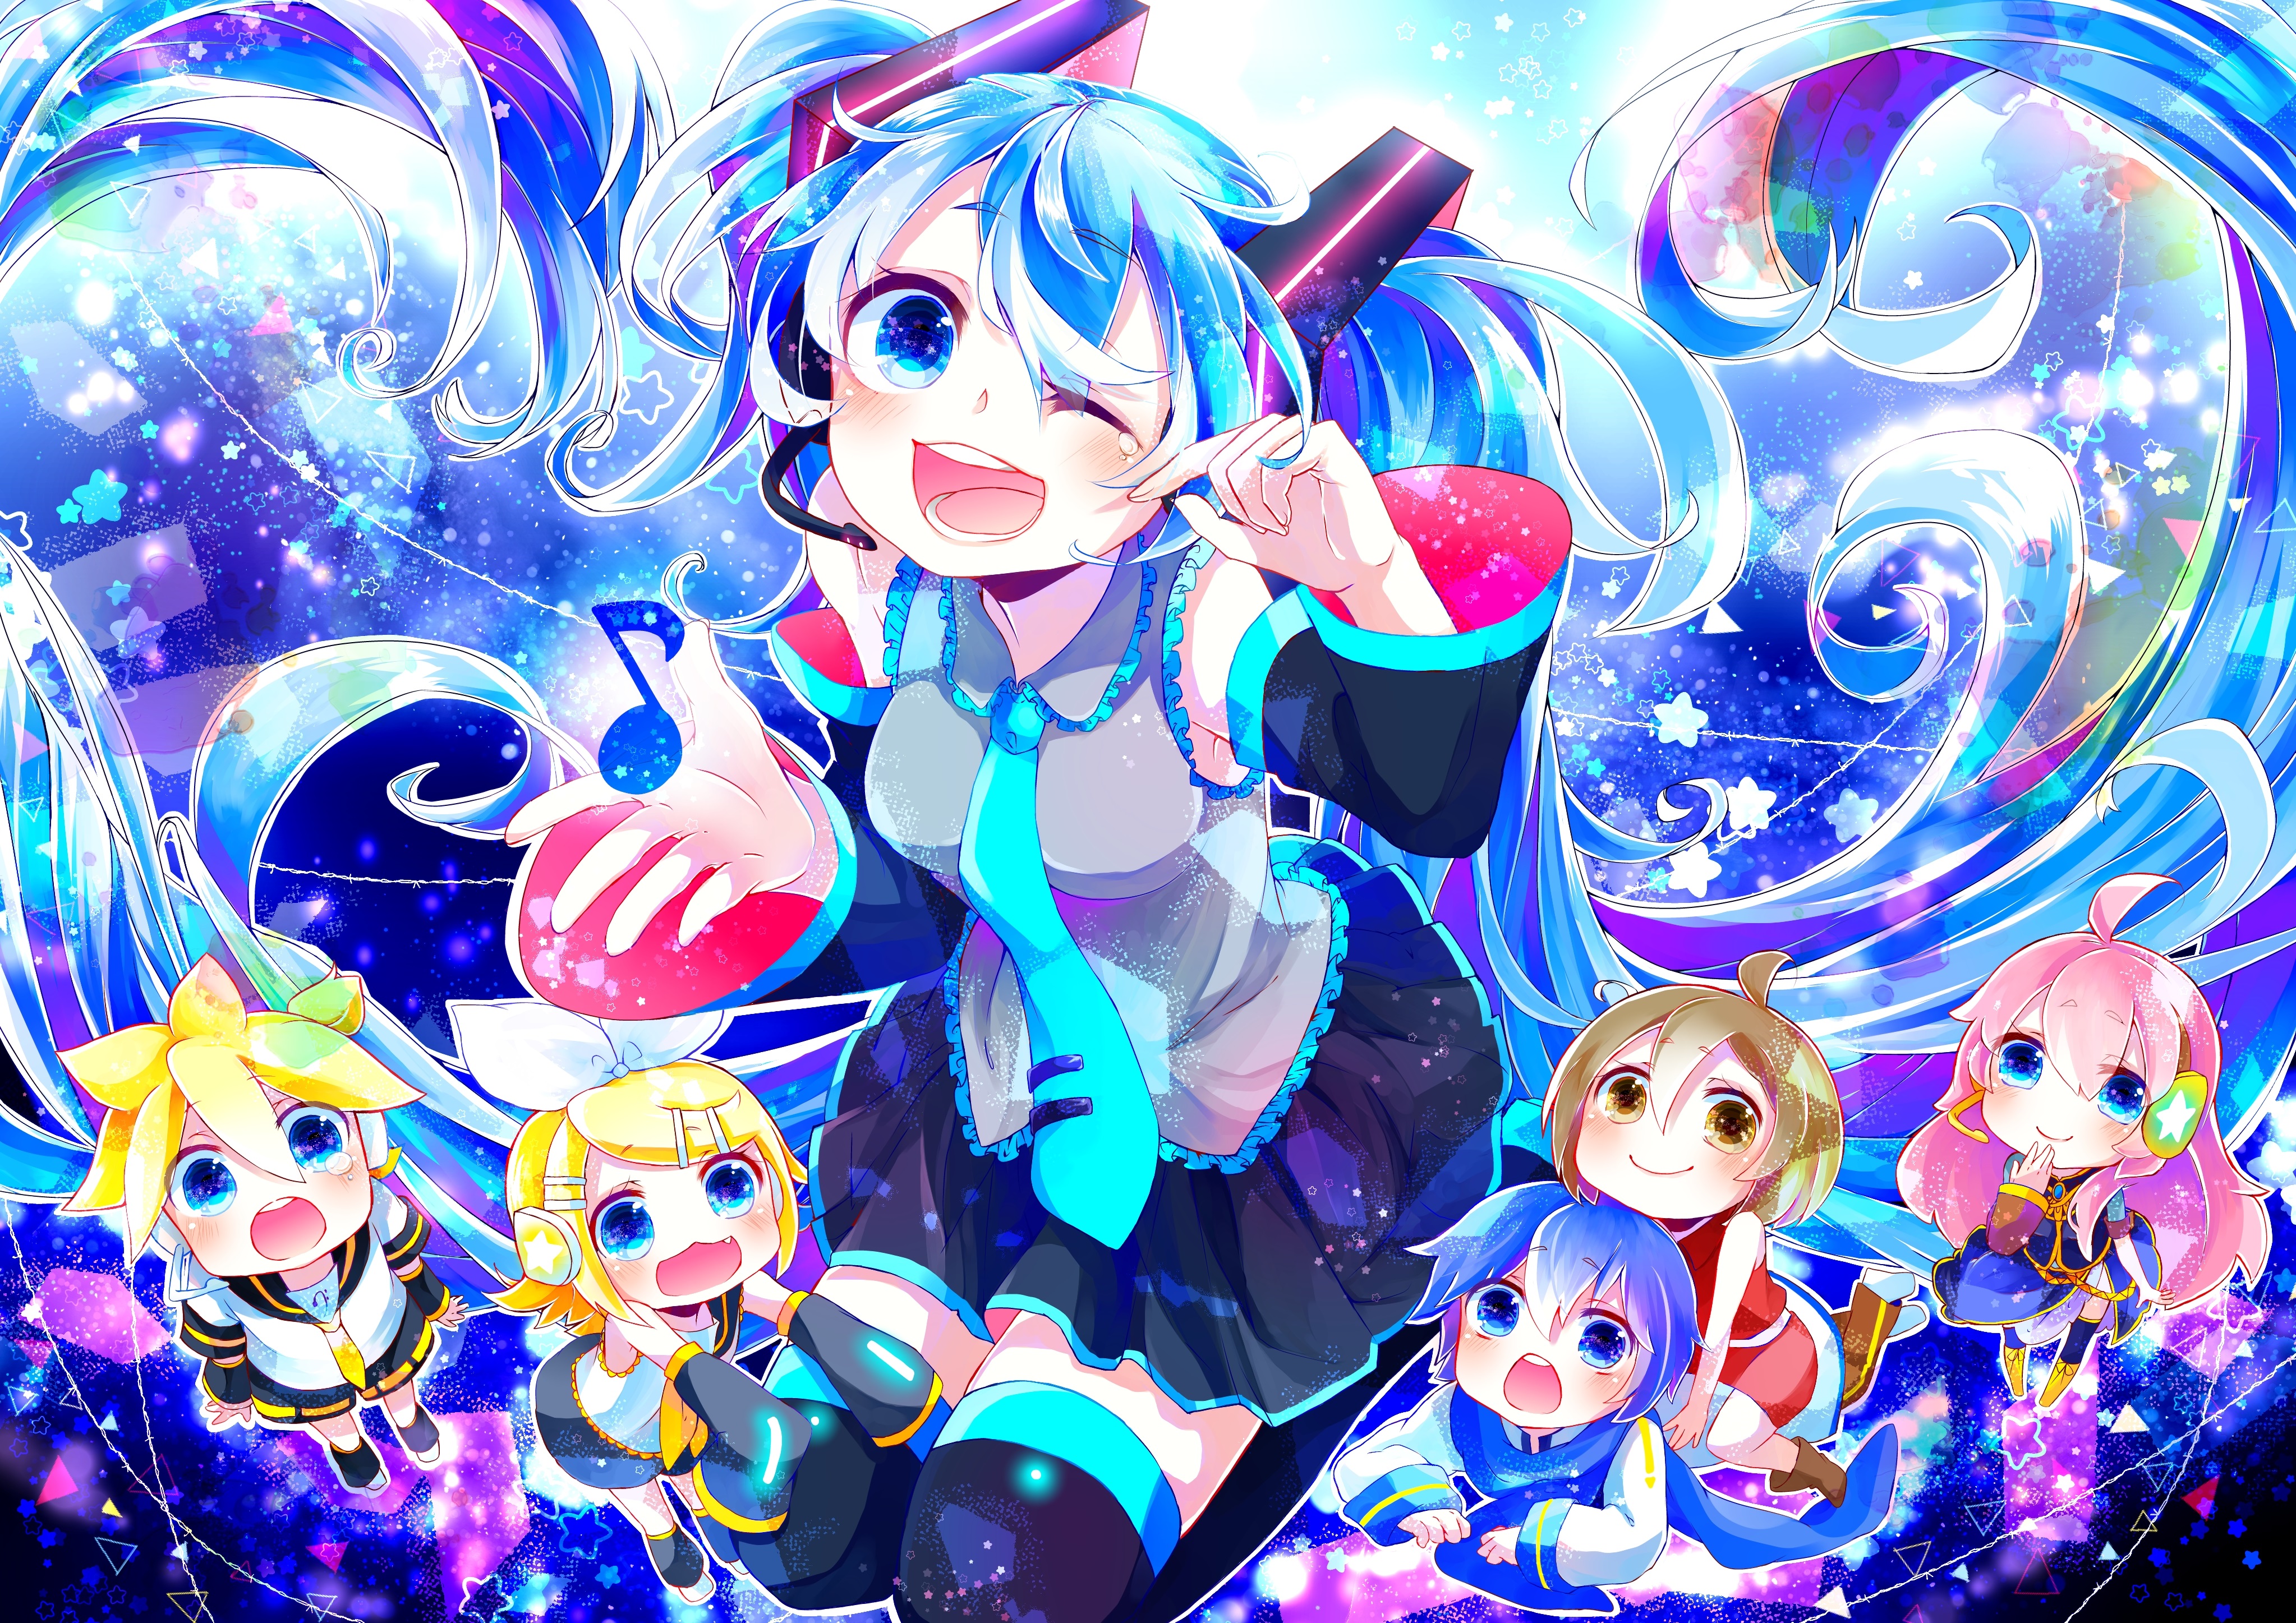 Vocaloid wallpapers, Anime, HQ Vocaloid pictures | 4K ...